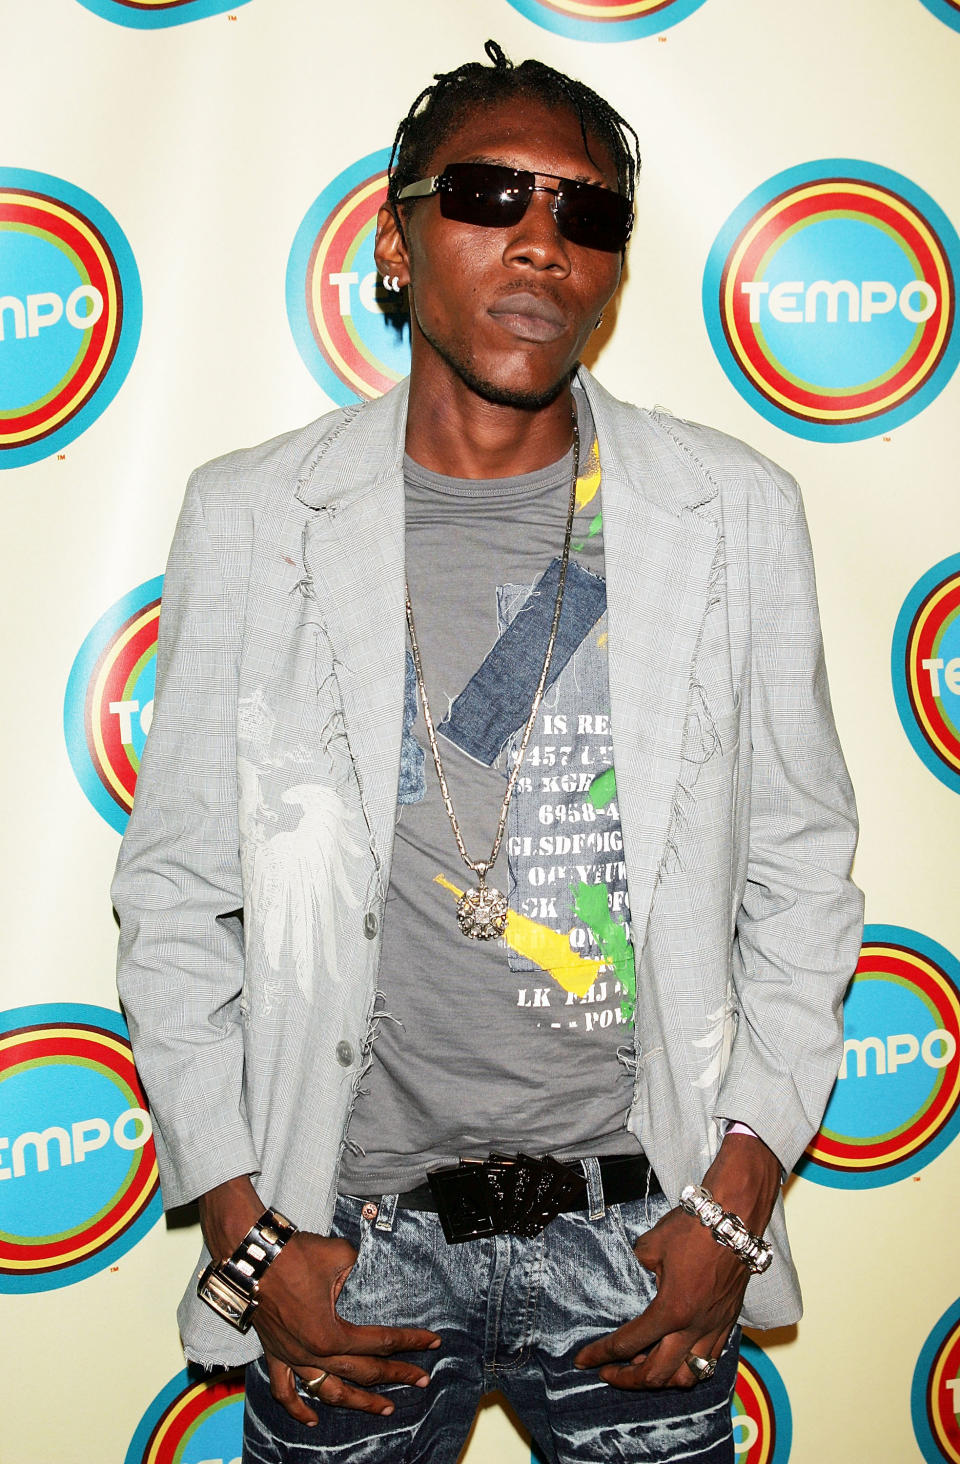 Vybz Kartel poses for a photo backstage during MTV’s Tempo network launch celebration October 16, 2005 in St. Mary, Jamaica.